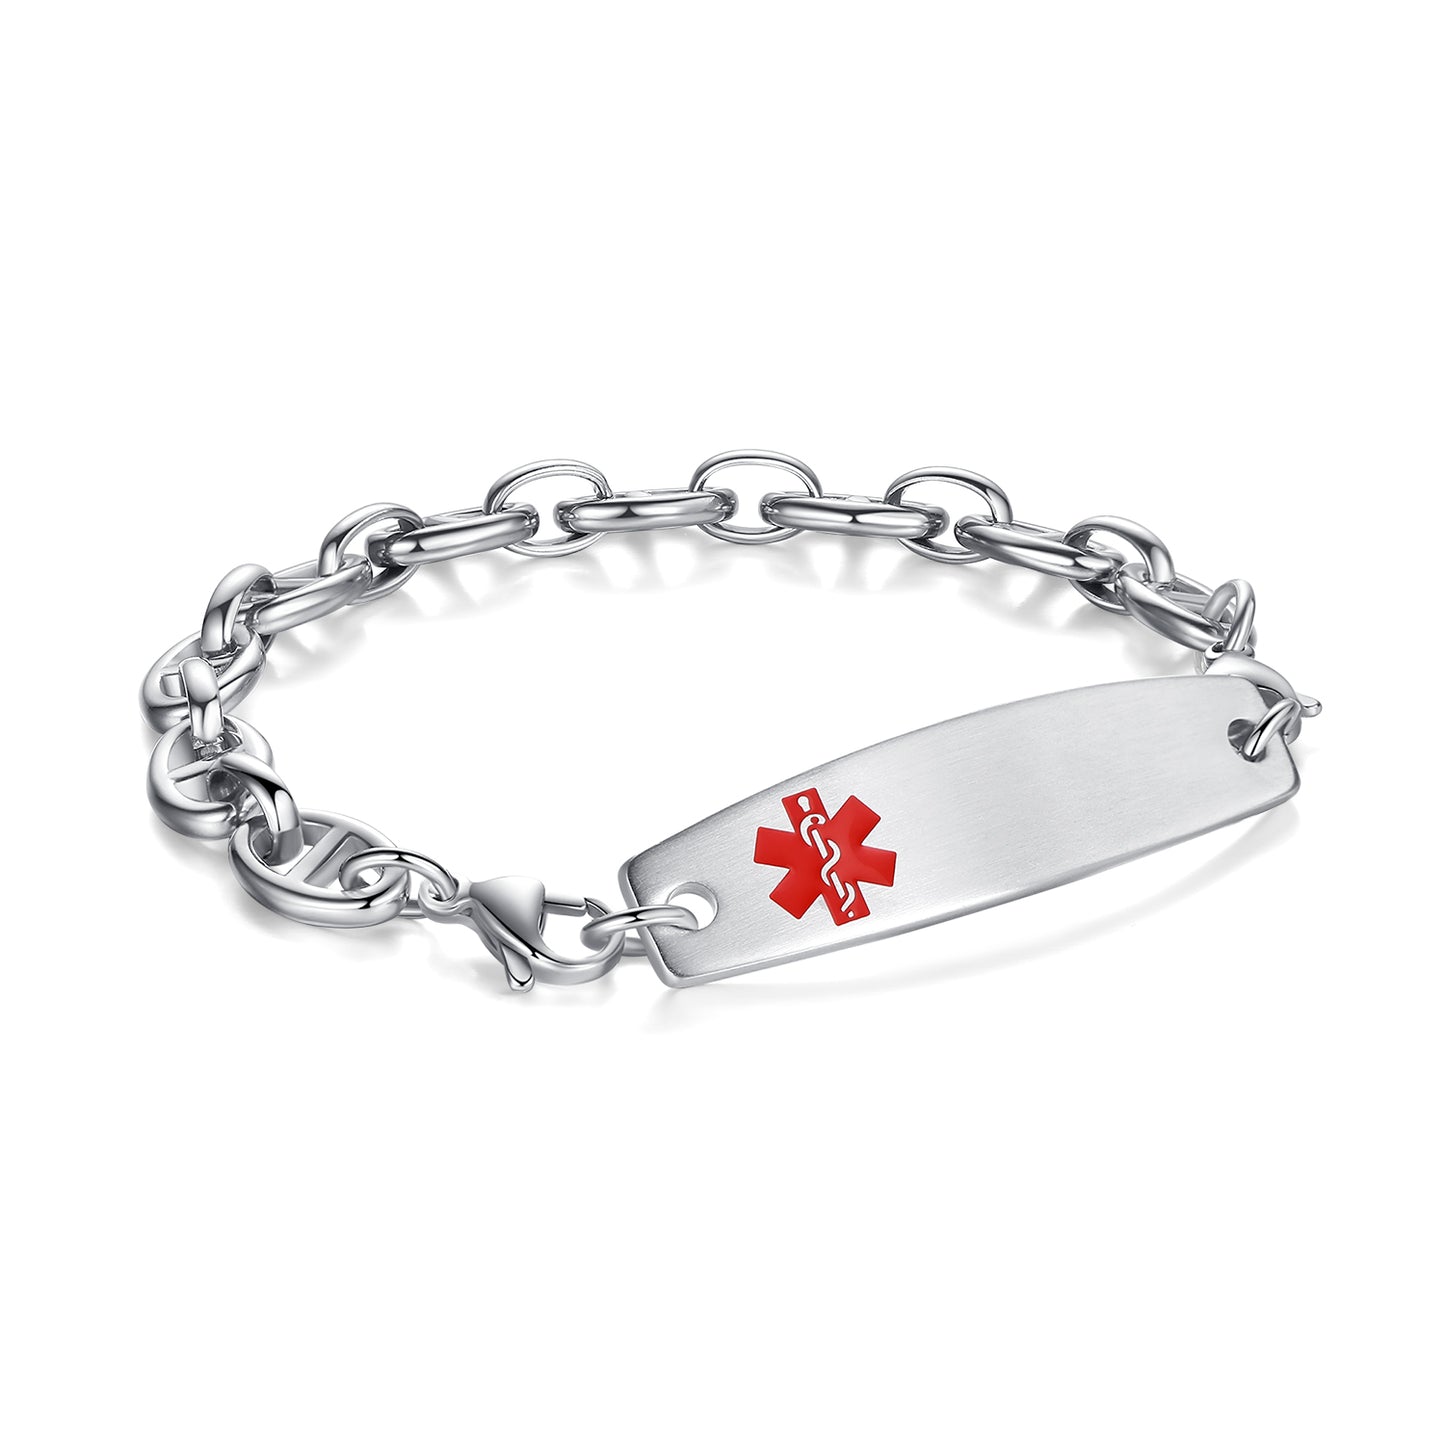 Stainless steel horseshoe chain interchangeable medical id bracelets for women men with free engraving